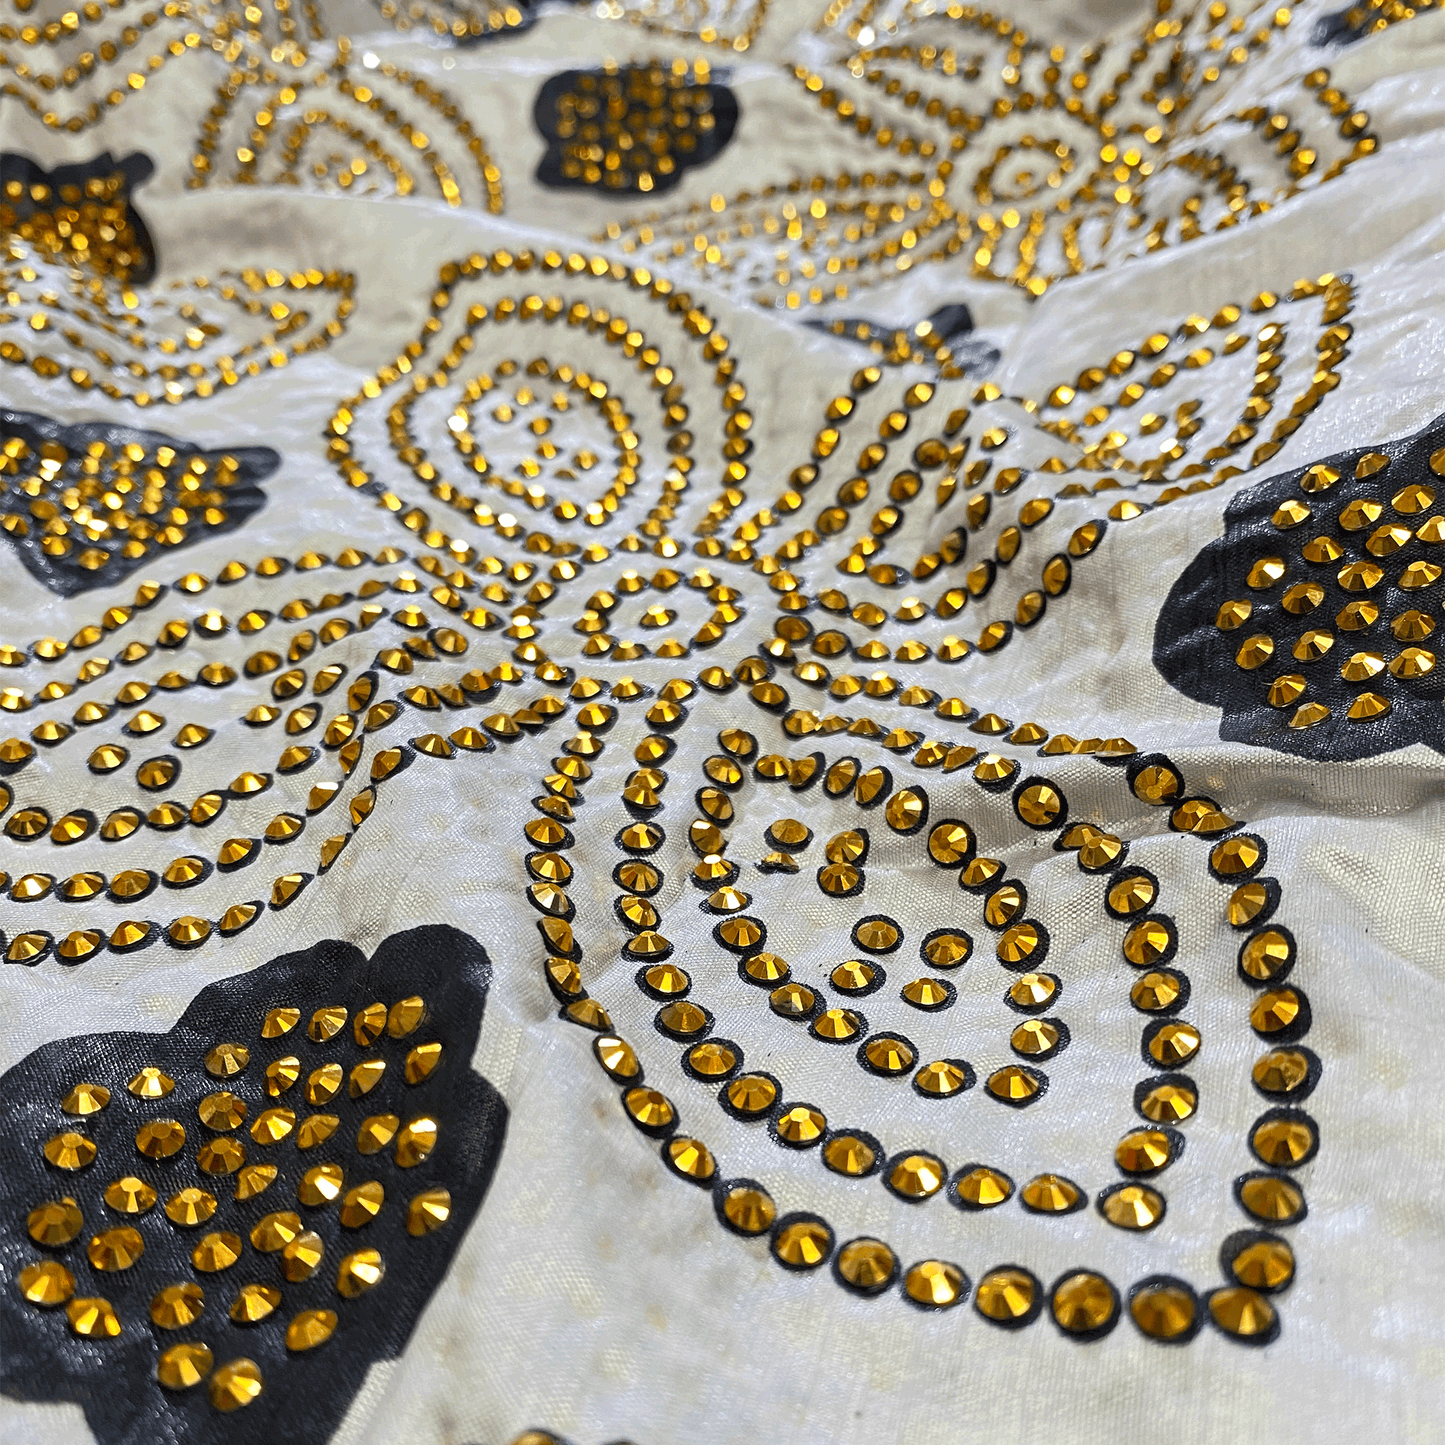 This Gorgeous traditional Shash will create the ultimate traditional Somali look, if you're looking to bring that extra touch of tradition into your wedding, look no further. Here we have a 3 piece set Shaash with original beautiful intricate print. with a modern twist of Gold stones.